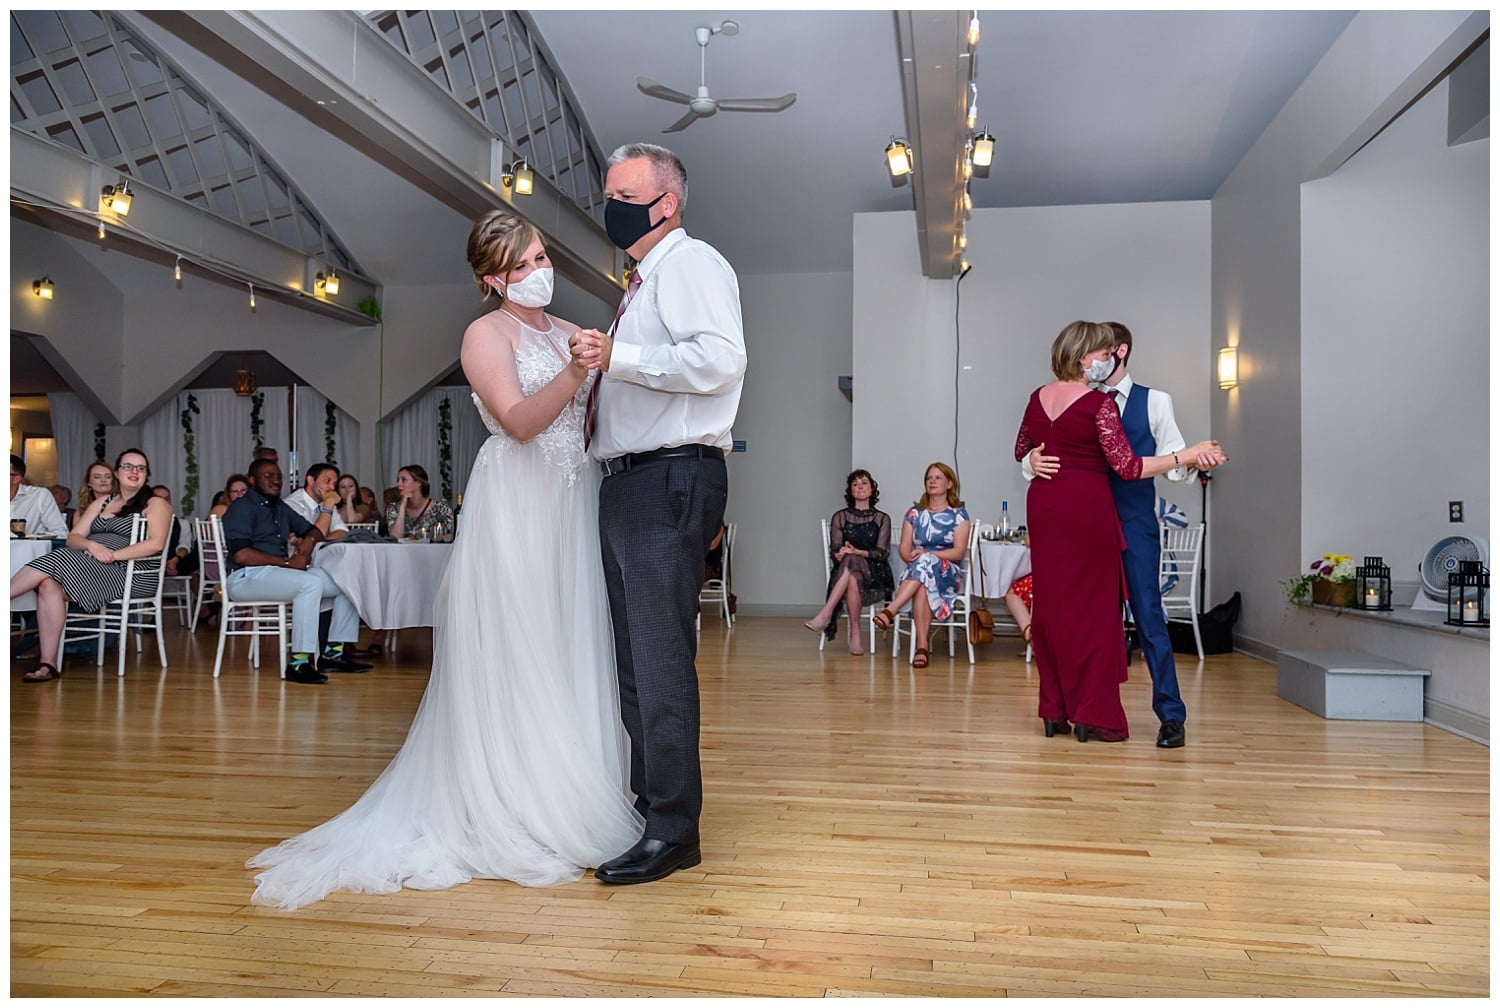 the father daughter and mother son dance done together during a wedding reception at the St Mary's Boat Club in Halifax, NS.